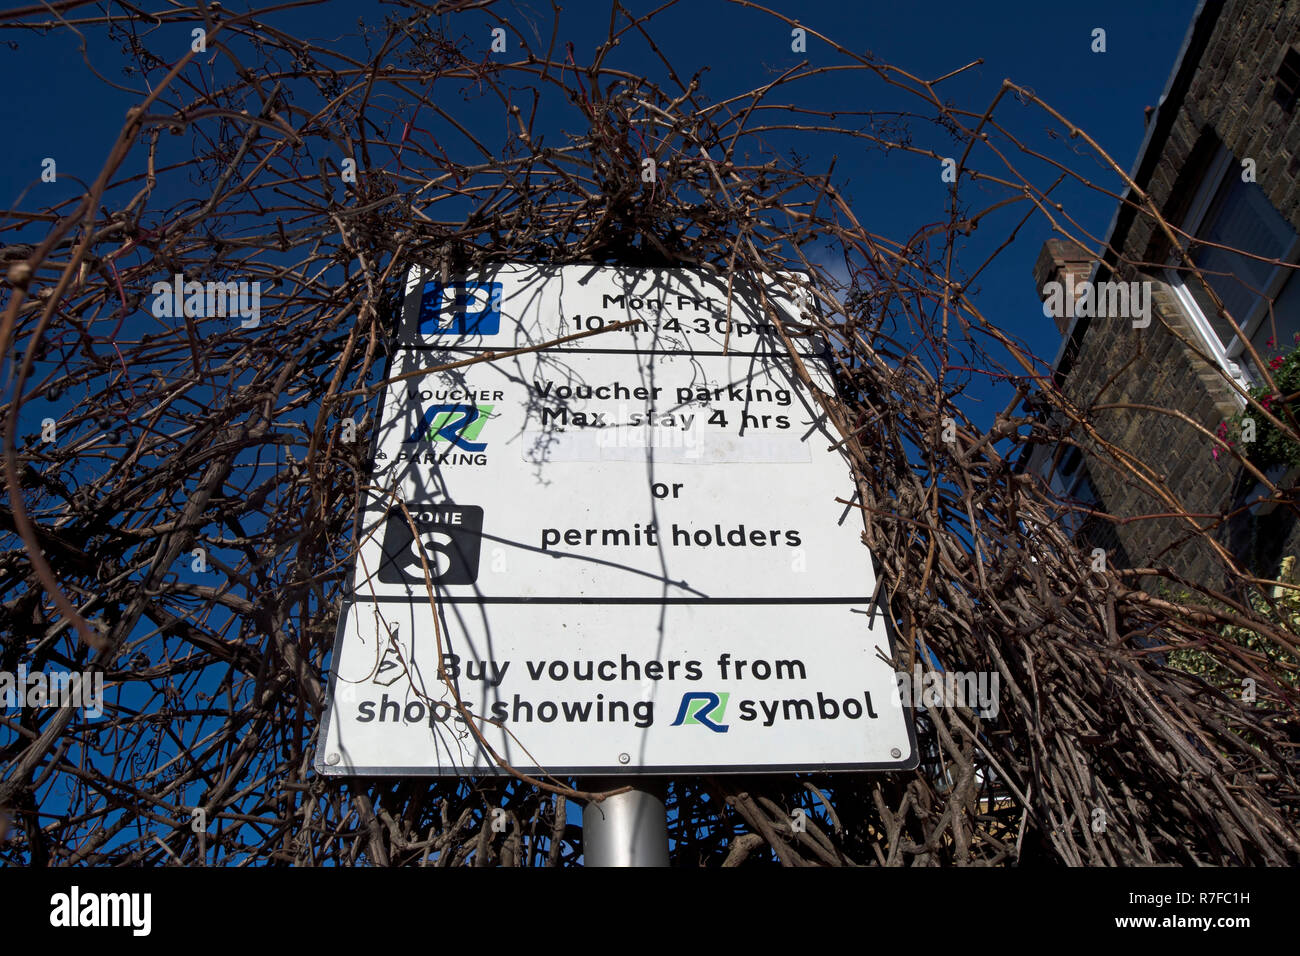 road sign giving details of car parking restrictions partially obscured by tree branches, in the borough of richmond upon thames, london, england Stock Photo